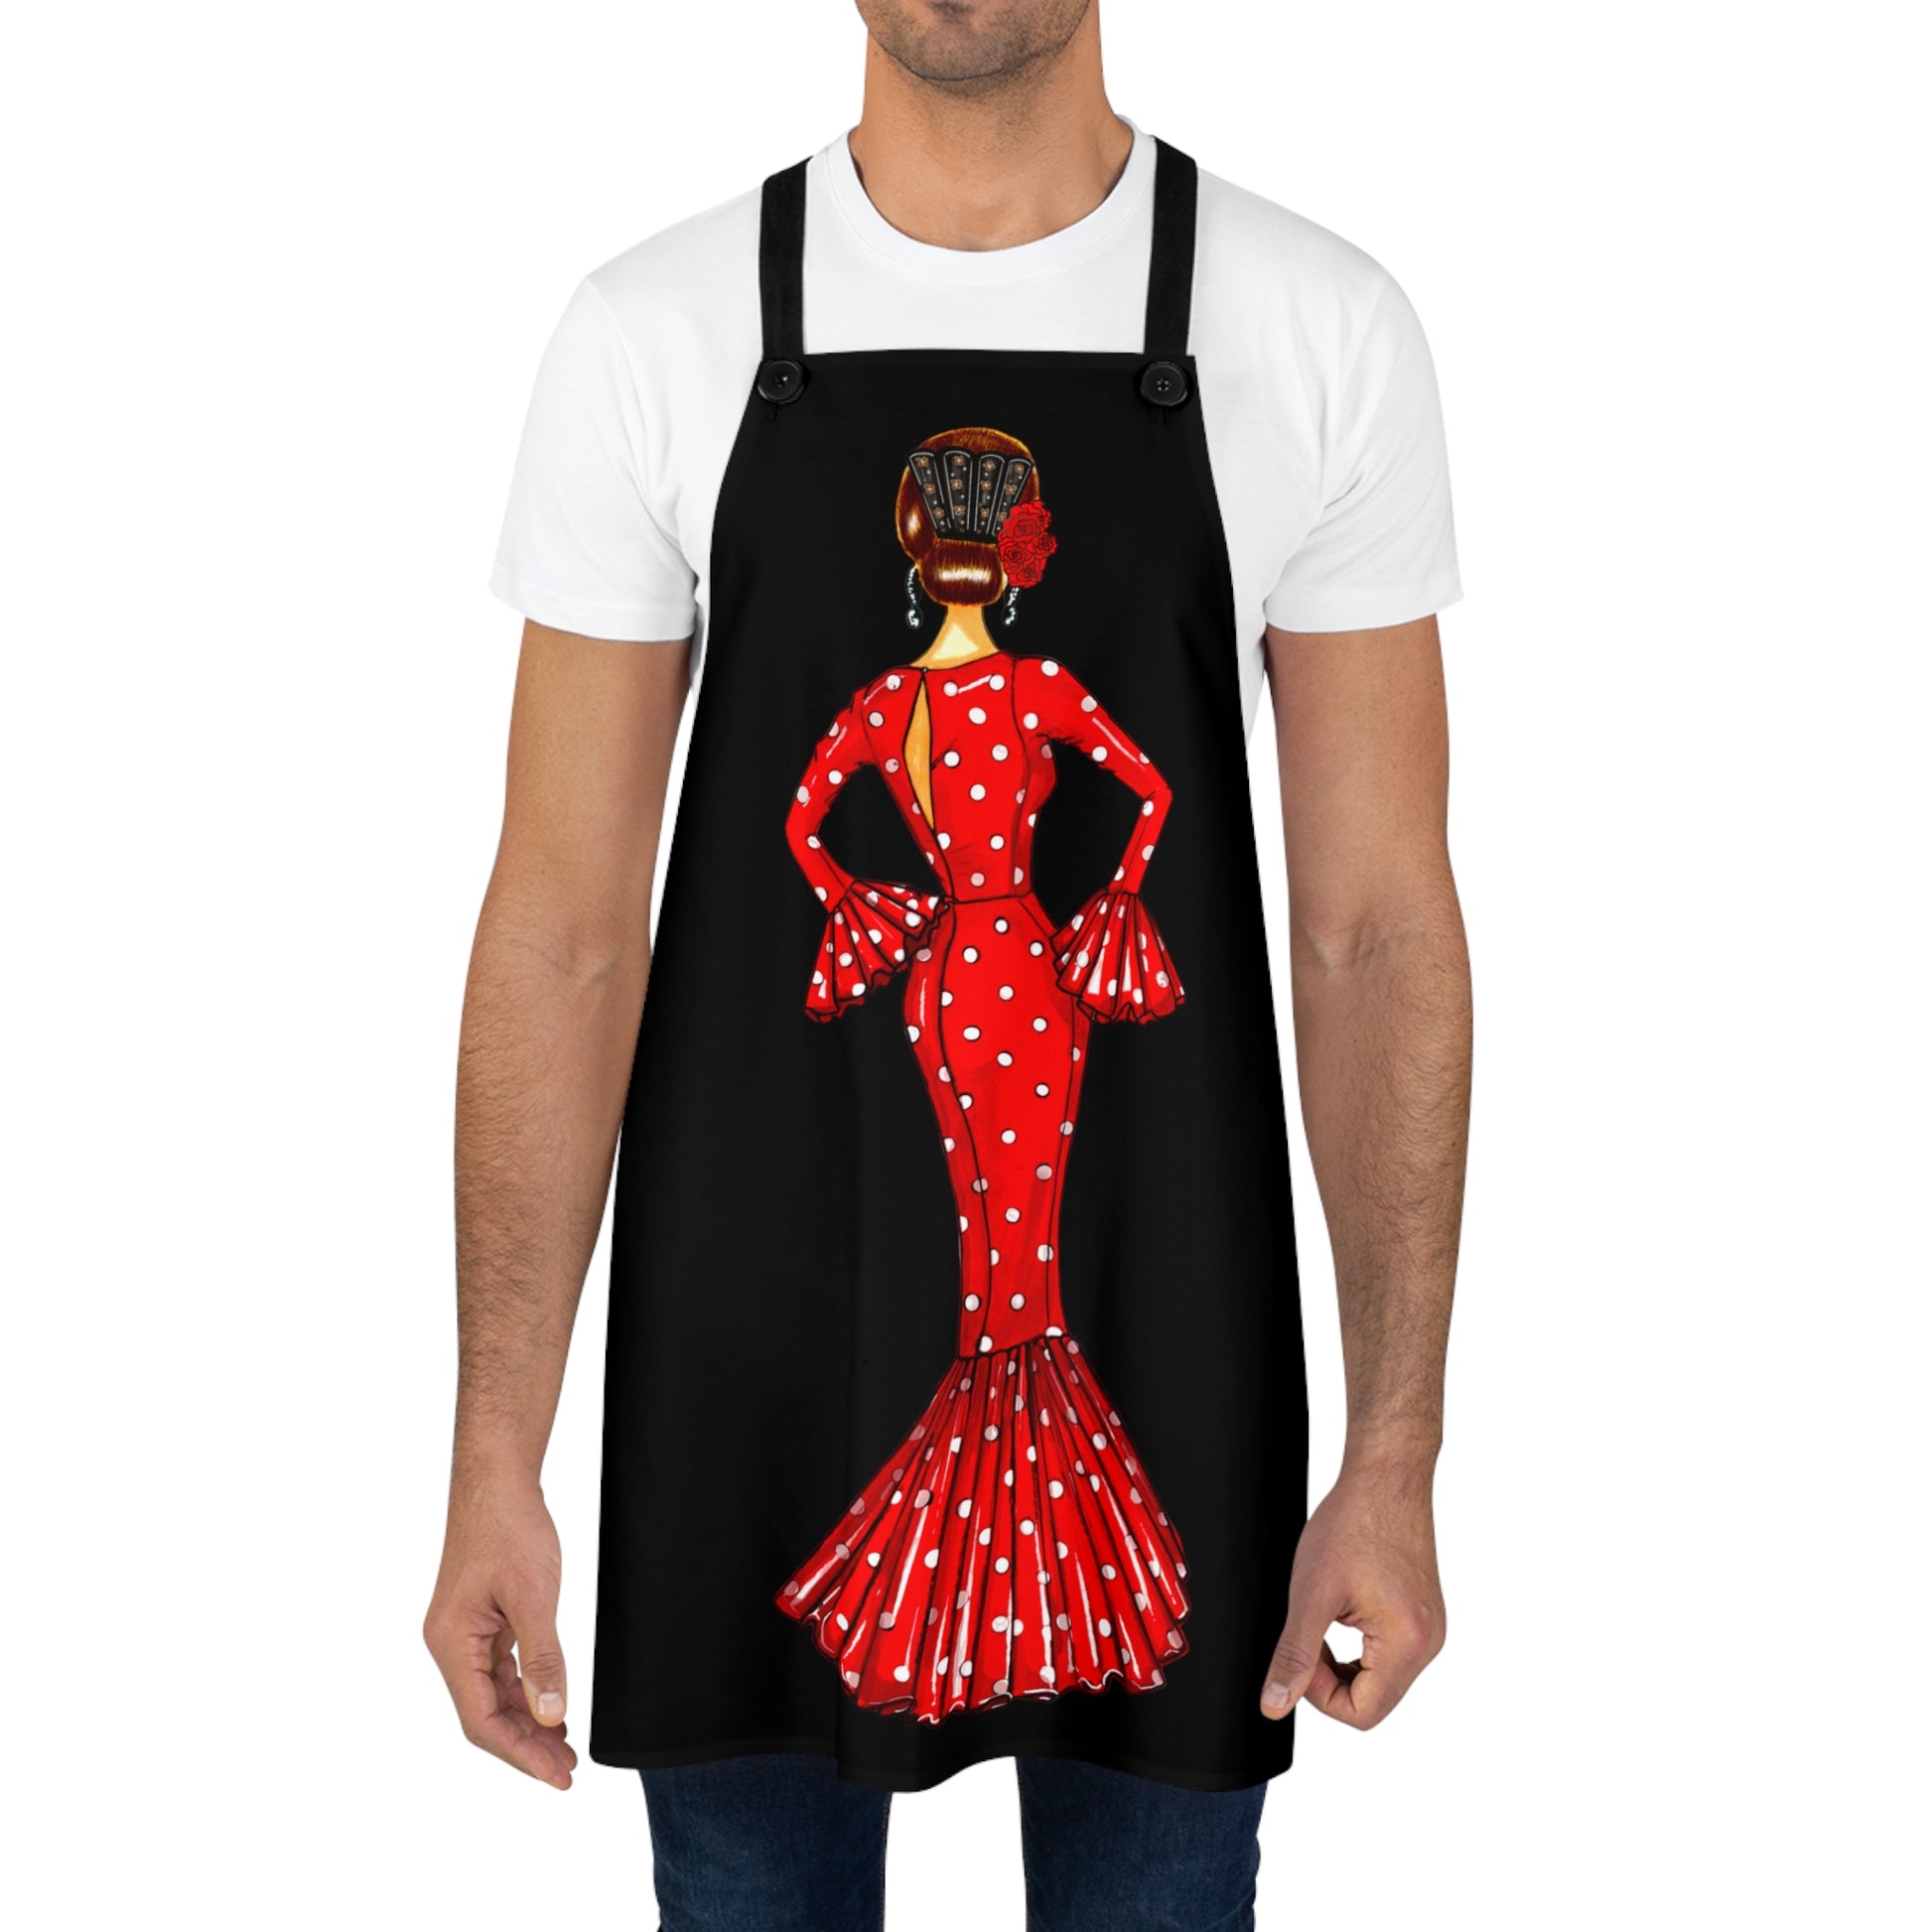 a man wearing an apron with a red polka dot dress on it